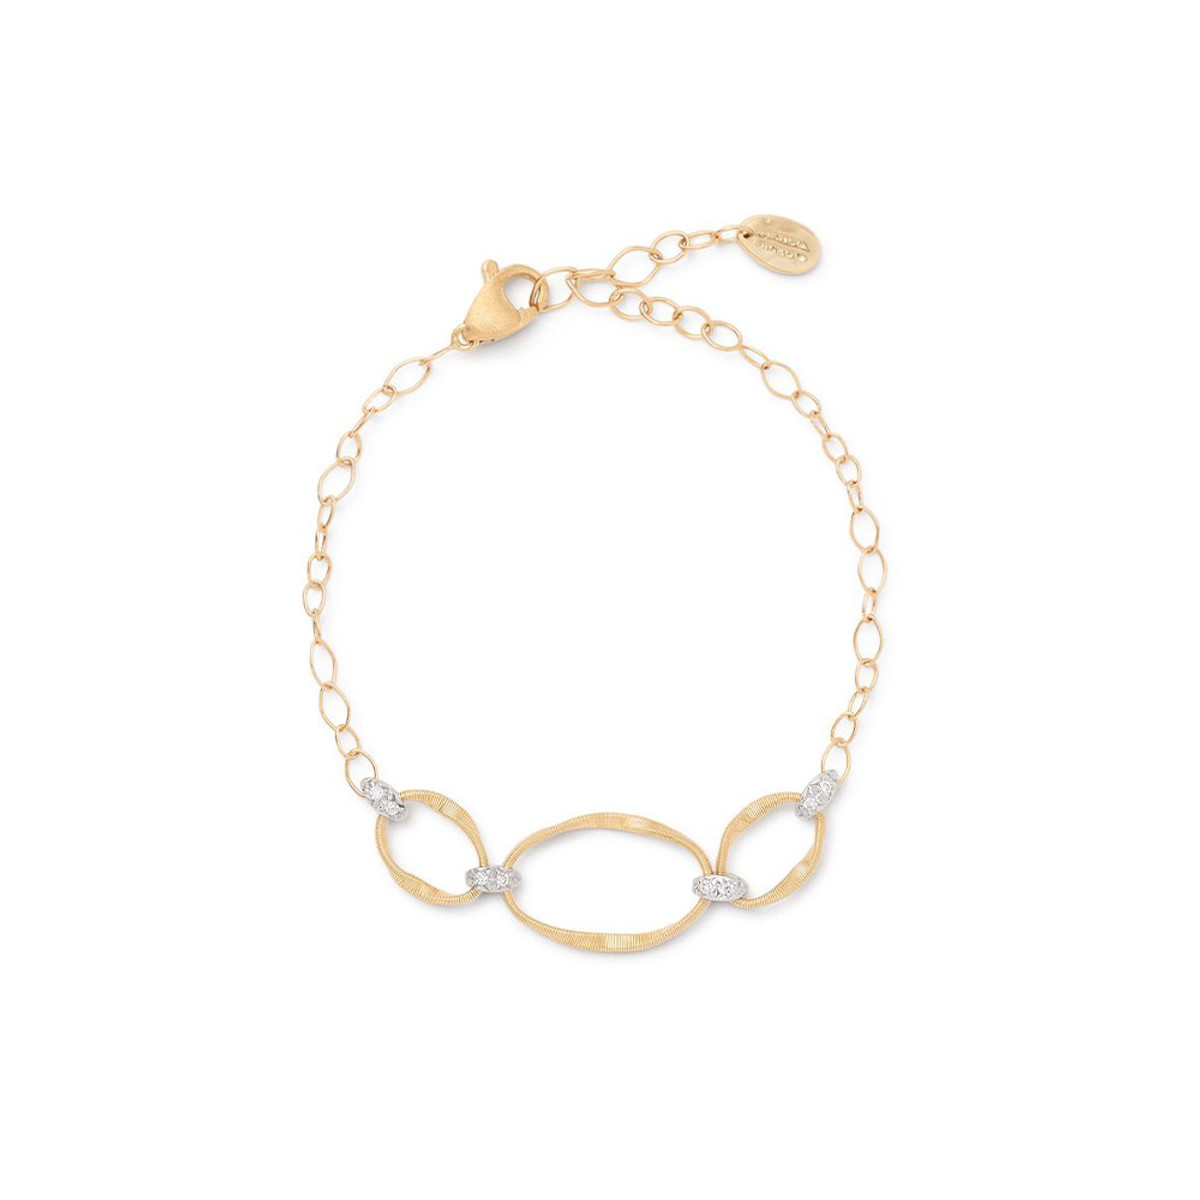 Marco Bicego Marrakech Onde 18K Yellow Gold and Diamond 3-Link Station Bracelet-54714 Product Image